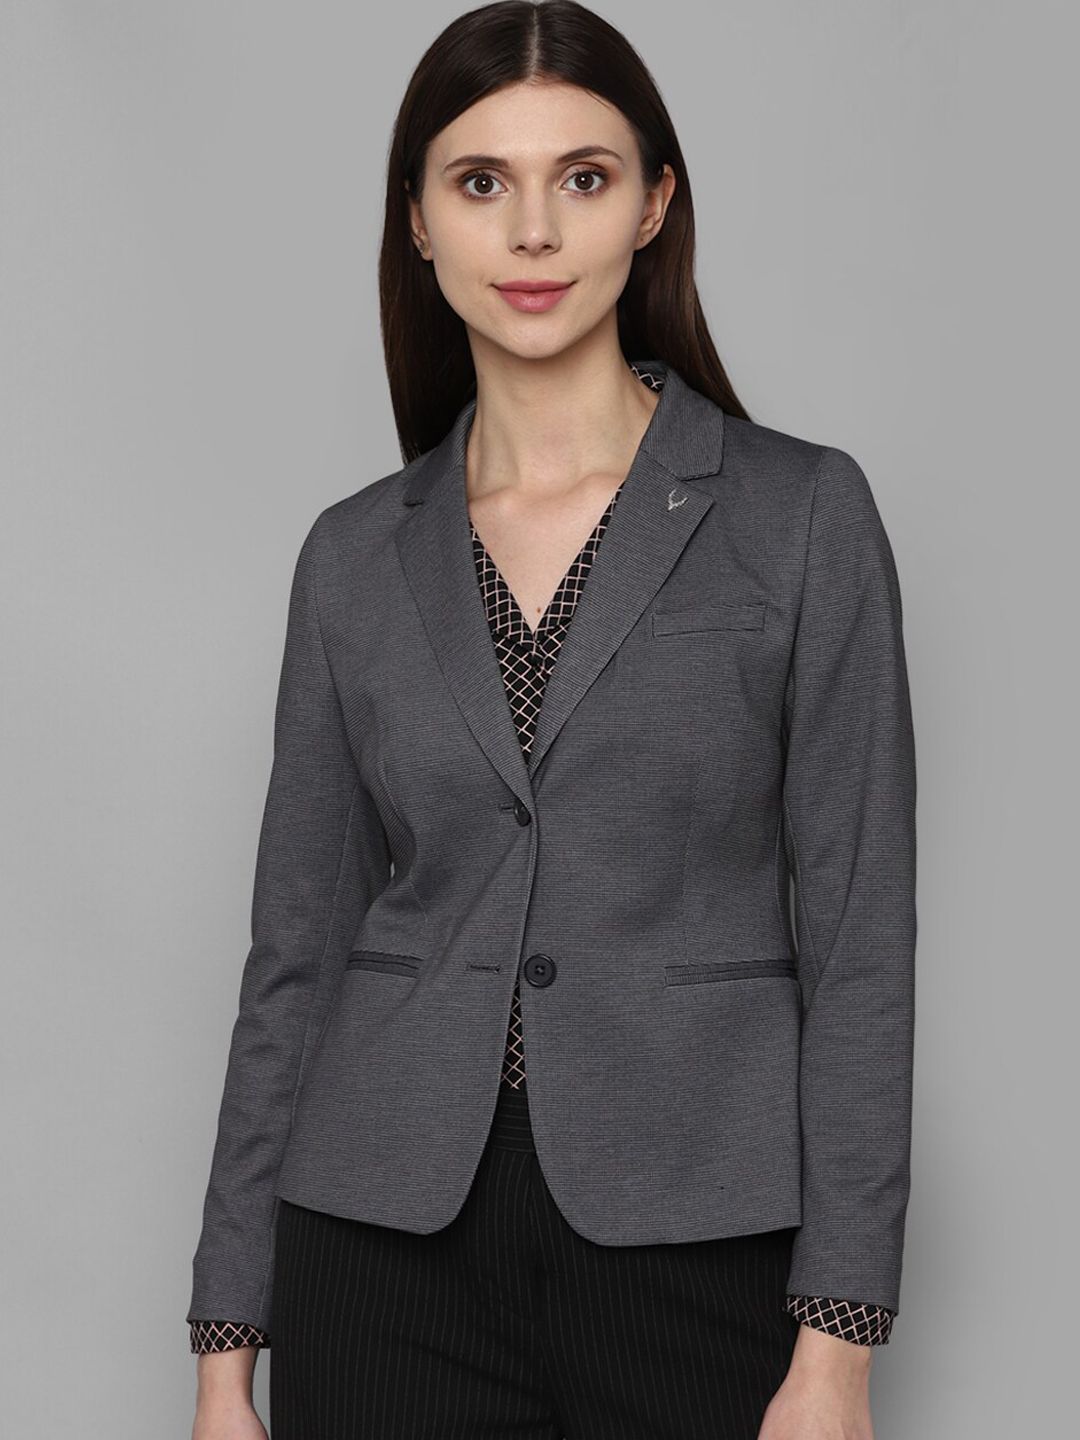 Allen Solly Women Grey Solid Regular-Fit Single-Breasted Blazer Price in India